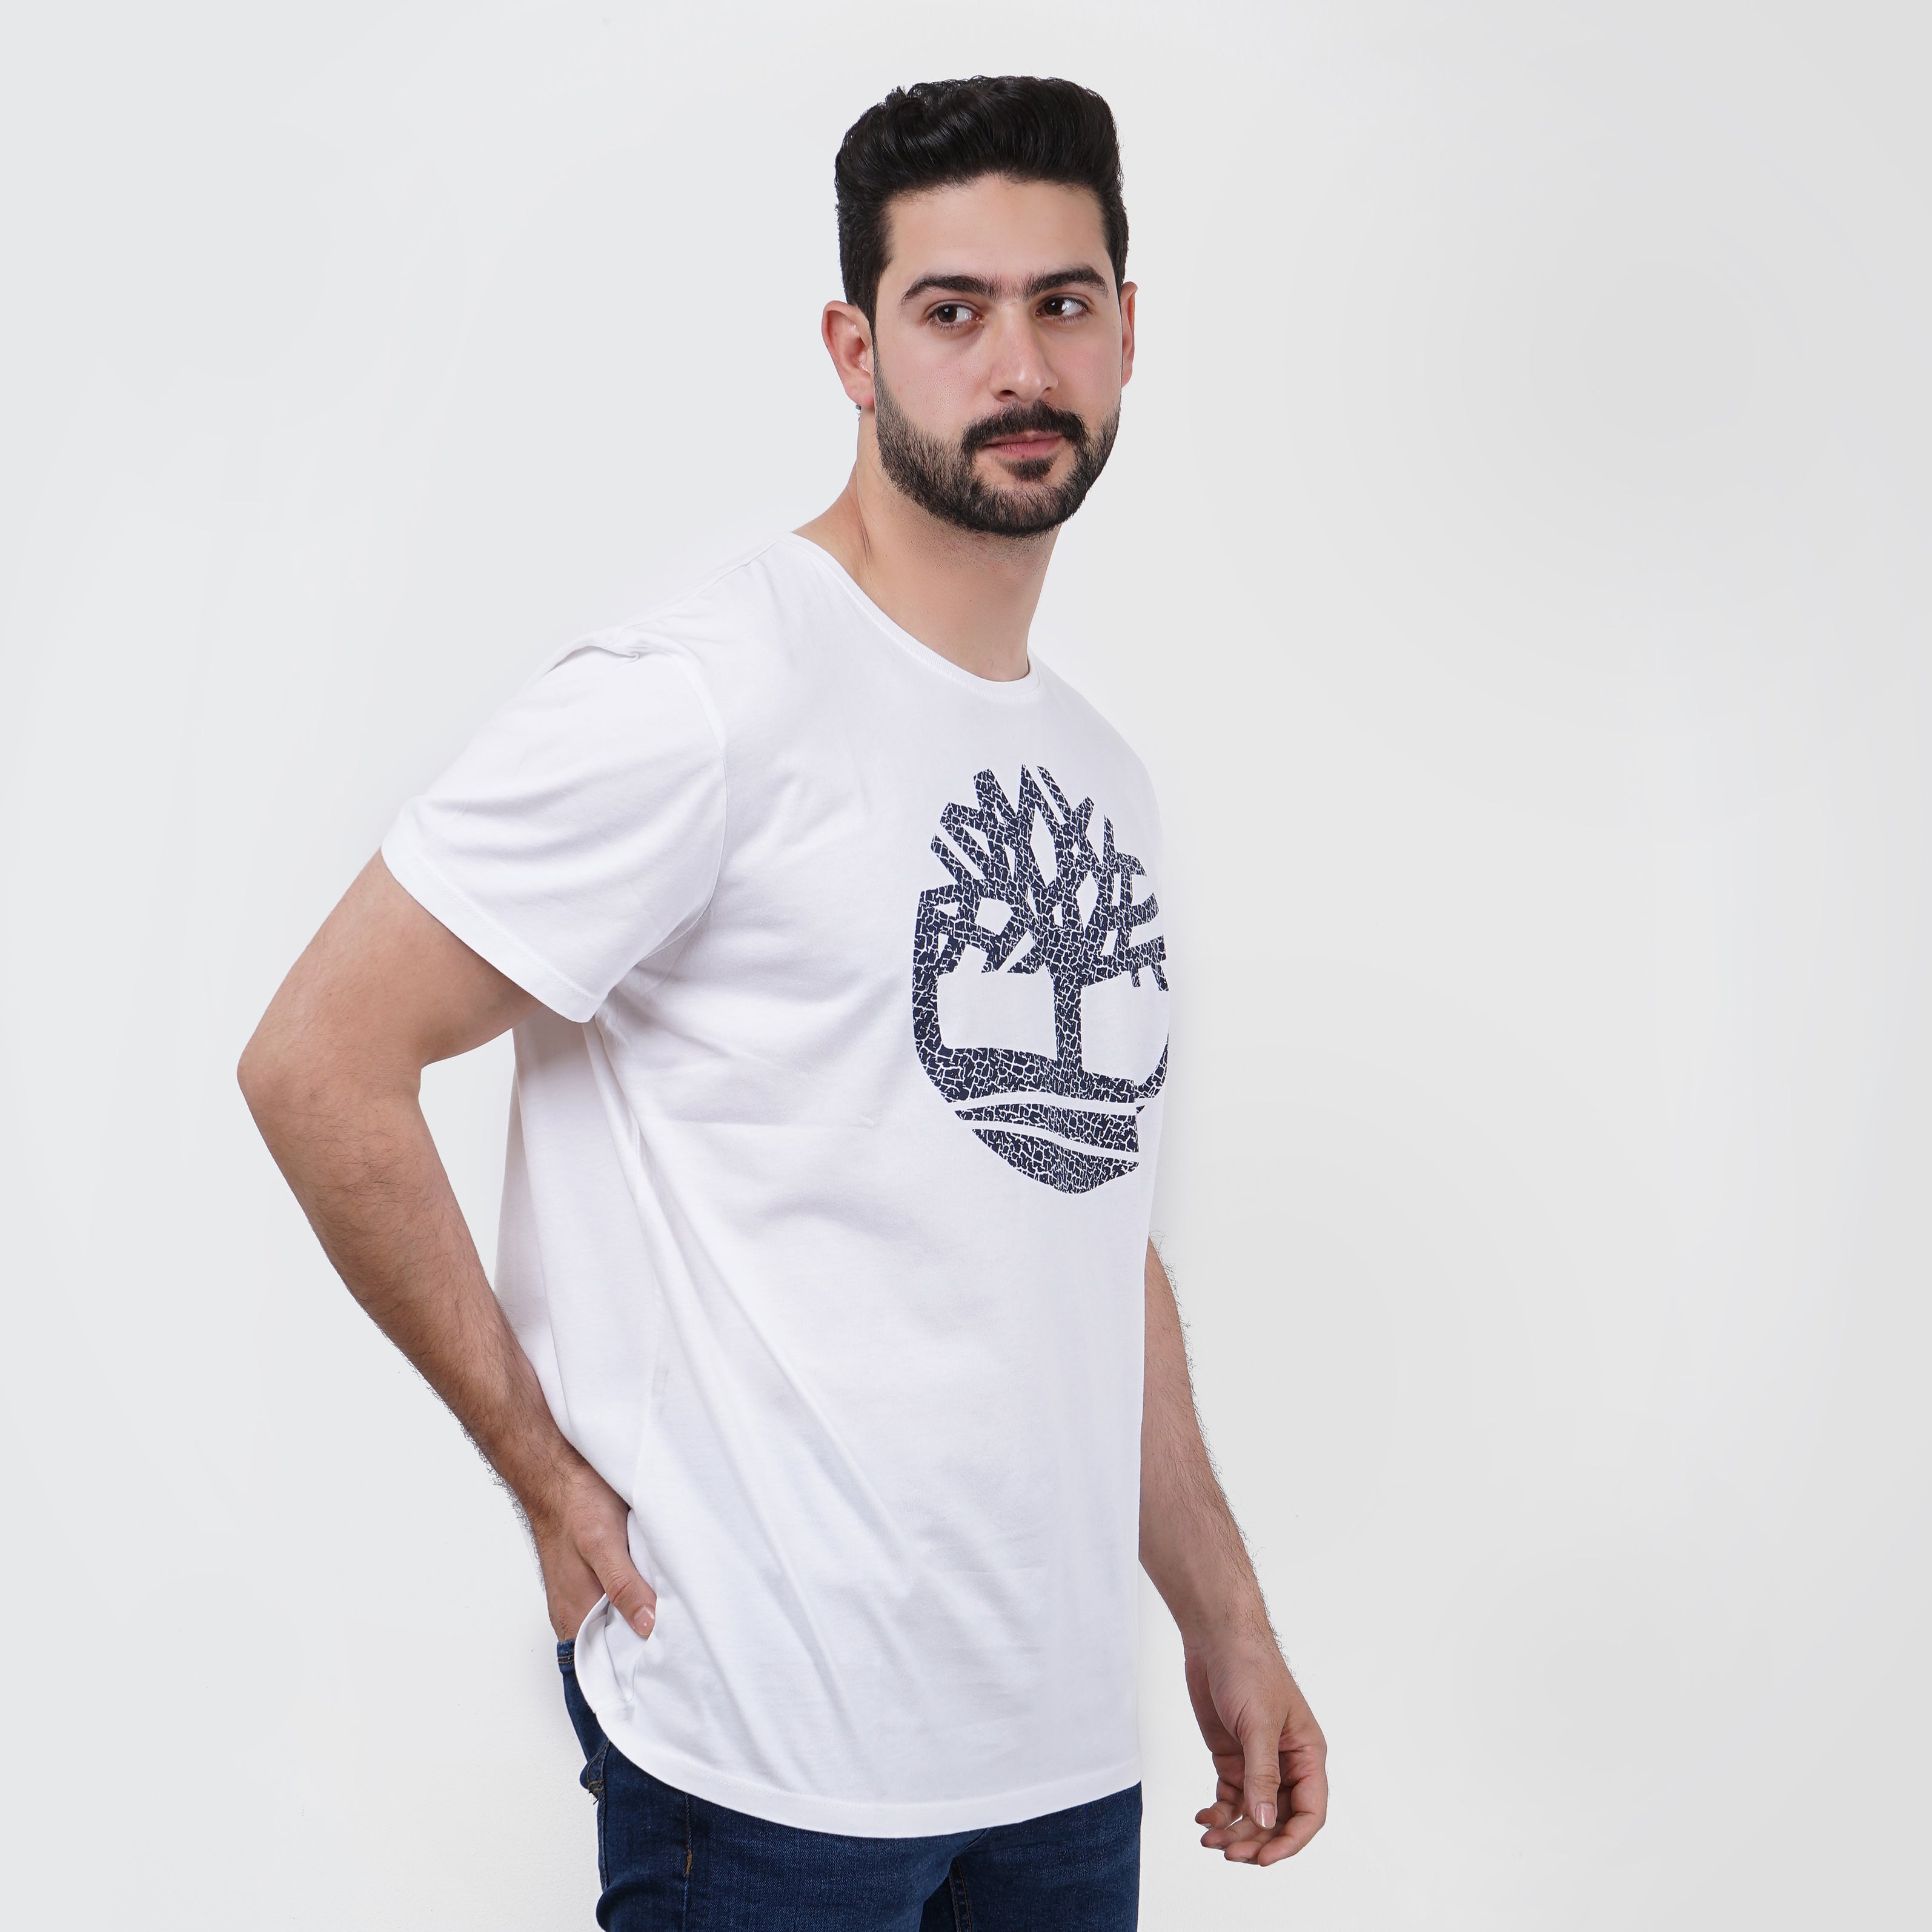 Man posing in white graphic Timberland t-shirt with abstract logo design, casual fashion.